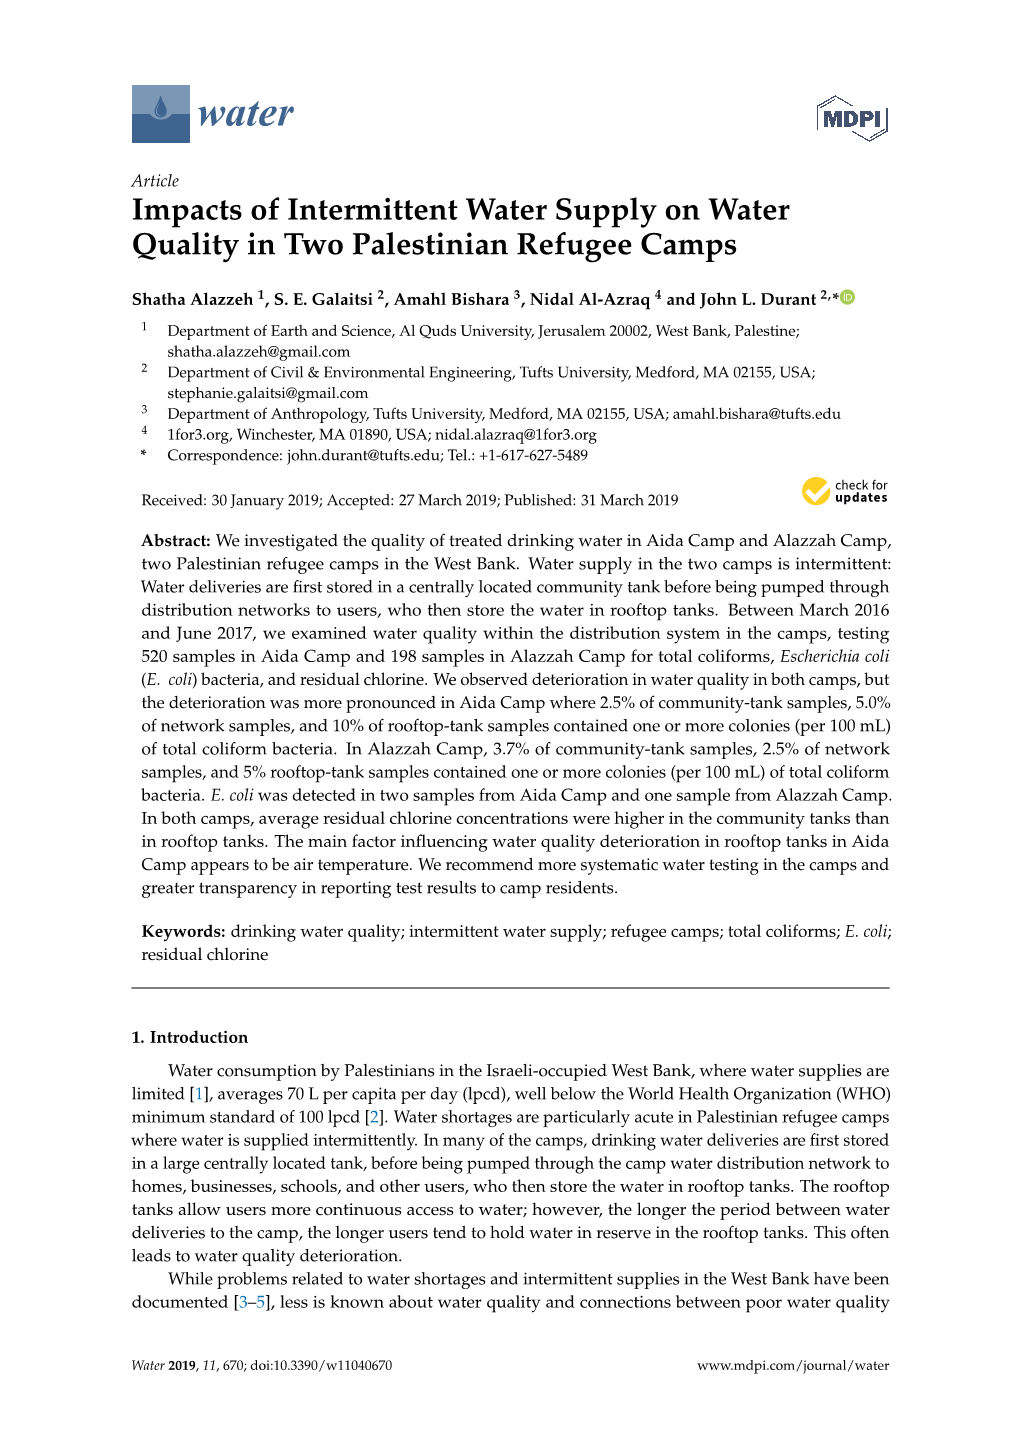 Impacts of Intermittent Water Supply on Water Quality in Two Palestinian Refugee Camps